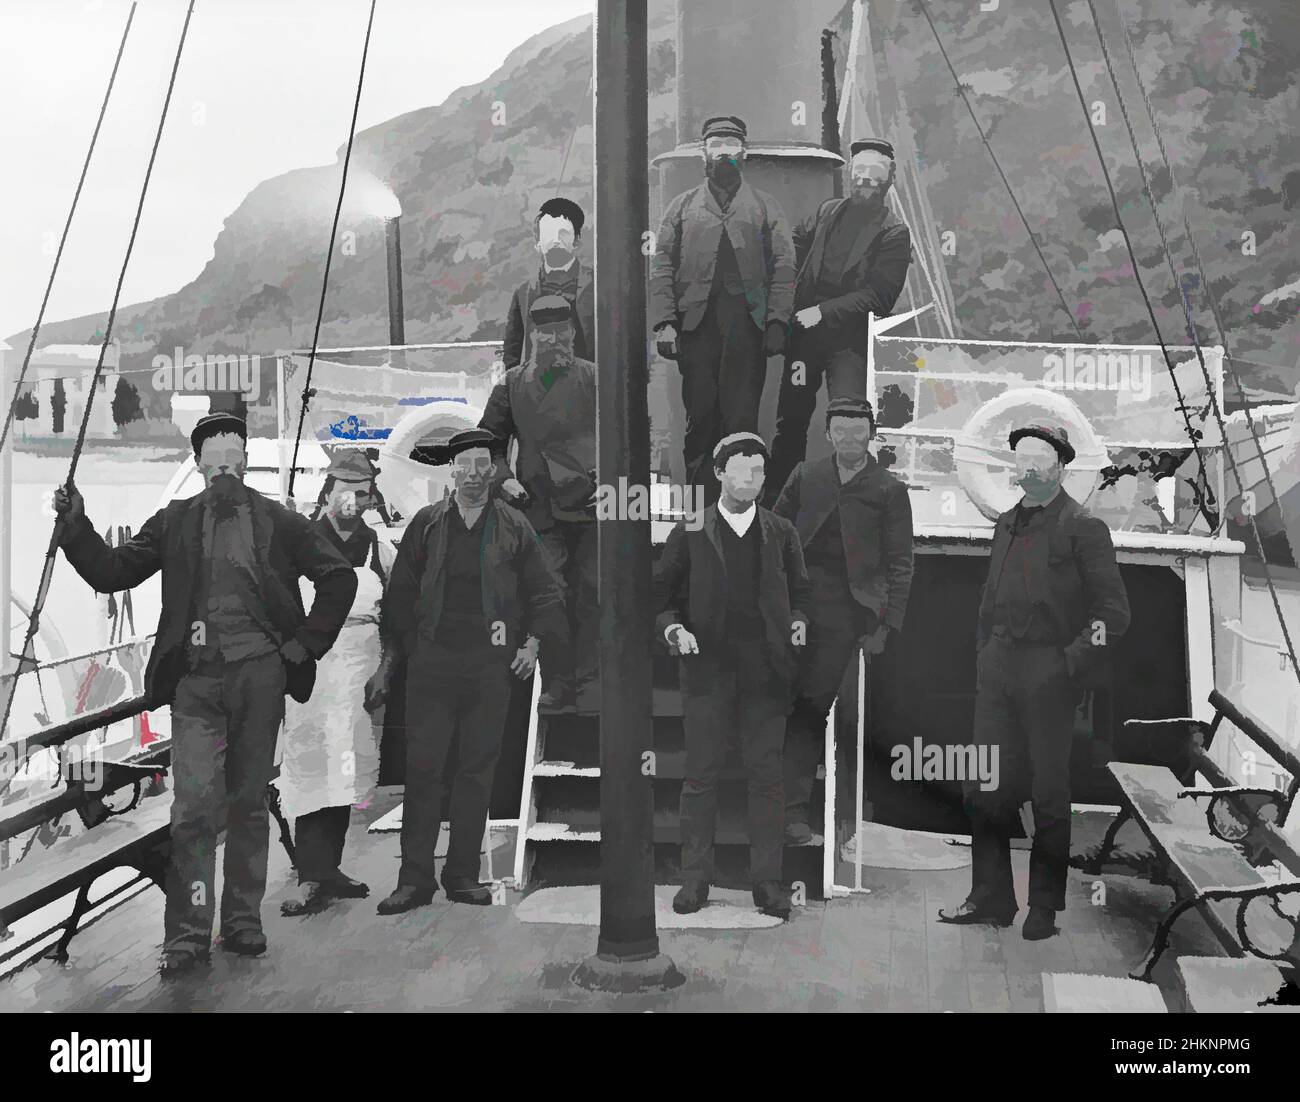 Art inspired by Crew of the P.S. Mountaineer, Lake Wakatipu, Burton Brothers studio, photography studio, March 1887, Dunedin, black-and-white photography, Paddle ship Mountaineer, Classic works modernized by Artotop with a splash of modernity. Shapes, color and value, eye-catching visual impact on art. Emotions through freedom of artworks in a contemporary way. A timeless message pursuing a wildly creative new direction. Artists turning to the digital medium and creating the Artotop NFT Stock Photo